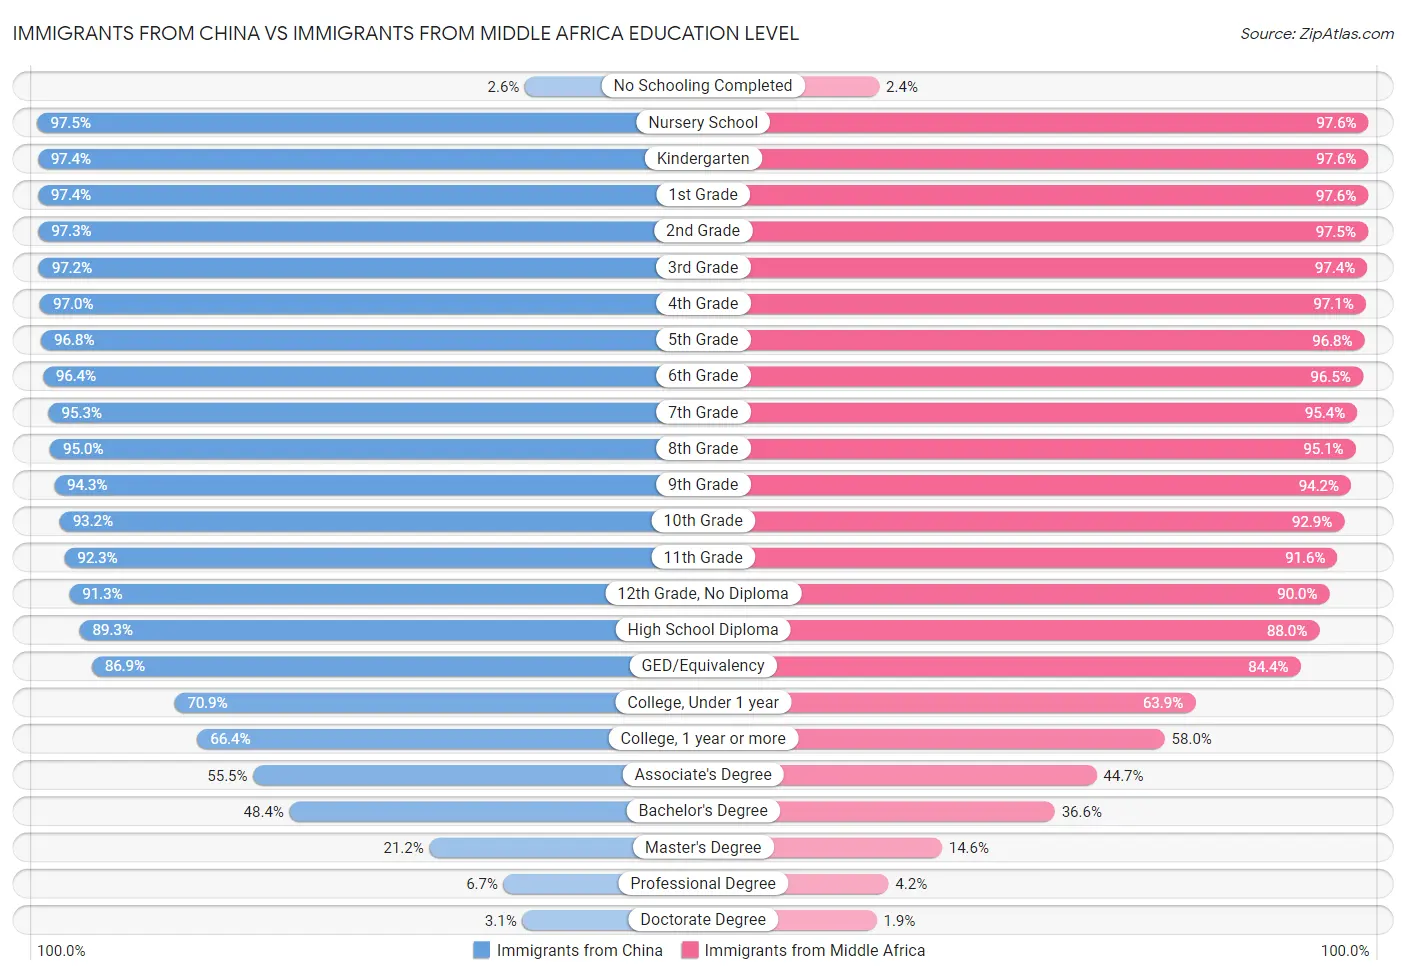 Immigrants from China vs Immigrants from Middle Africa Education Level